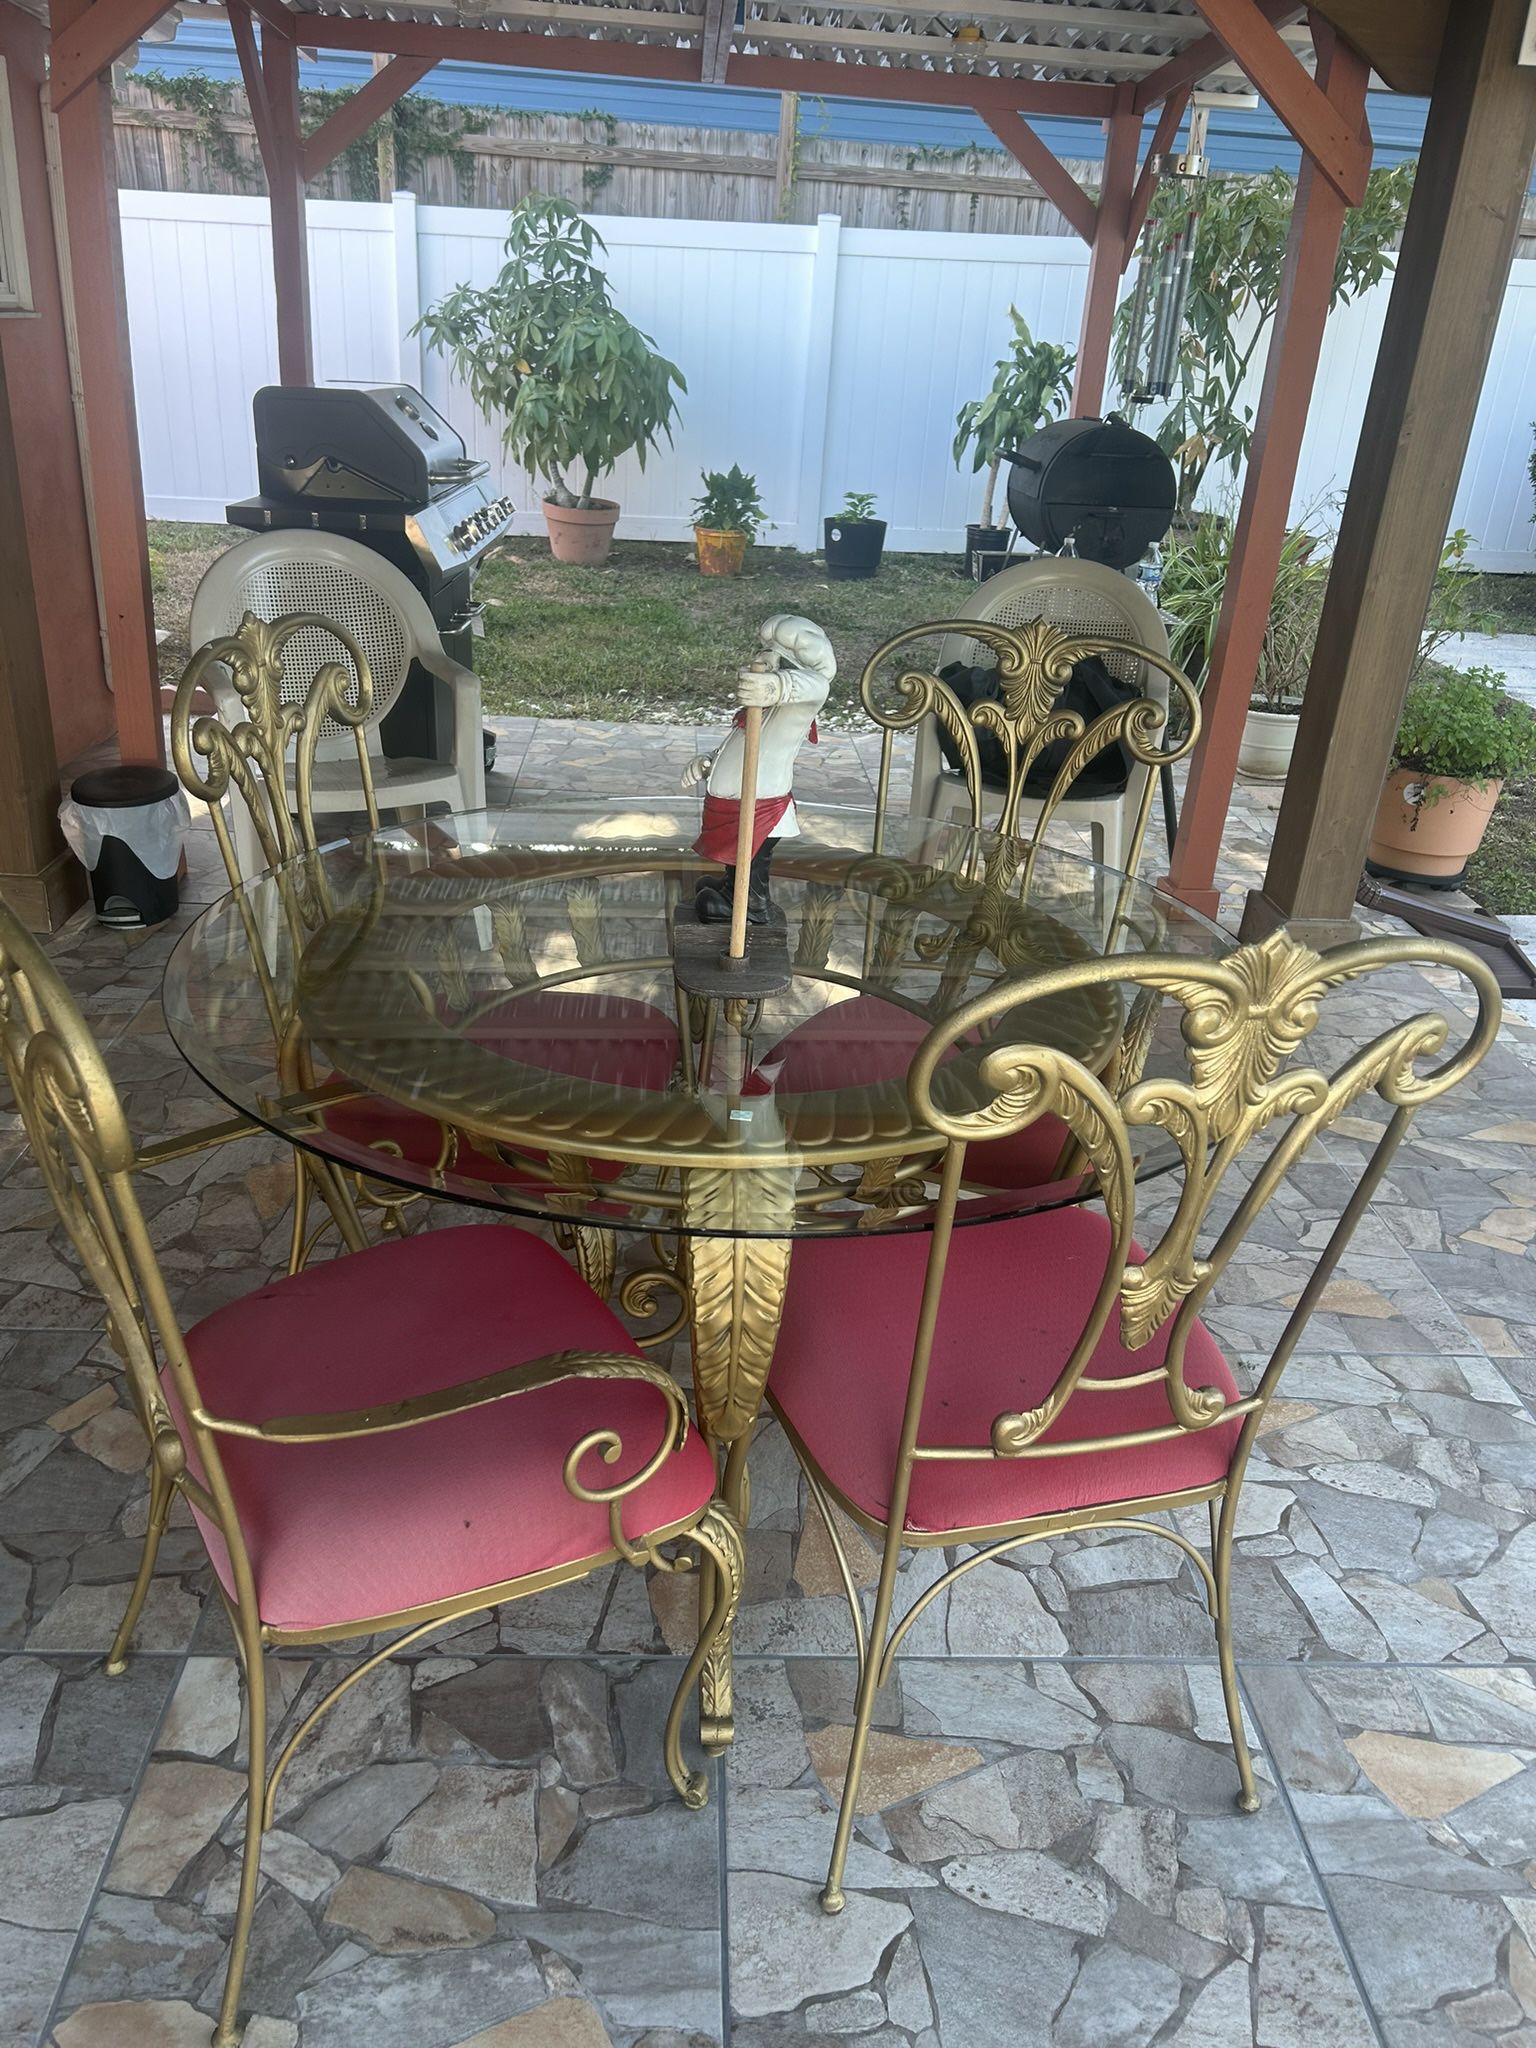 Outdoor table with Chairs 